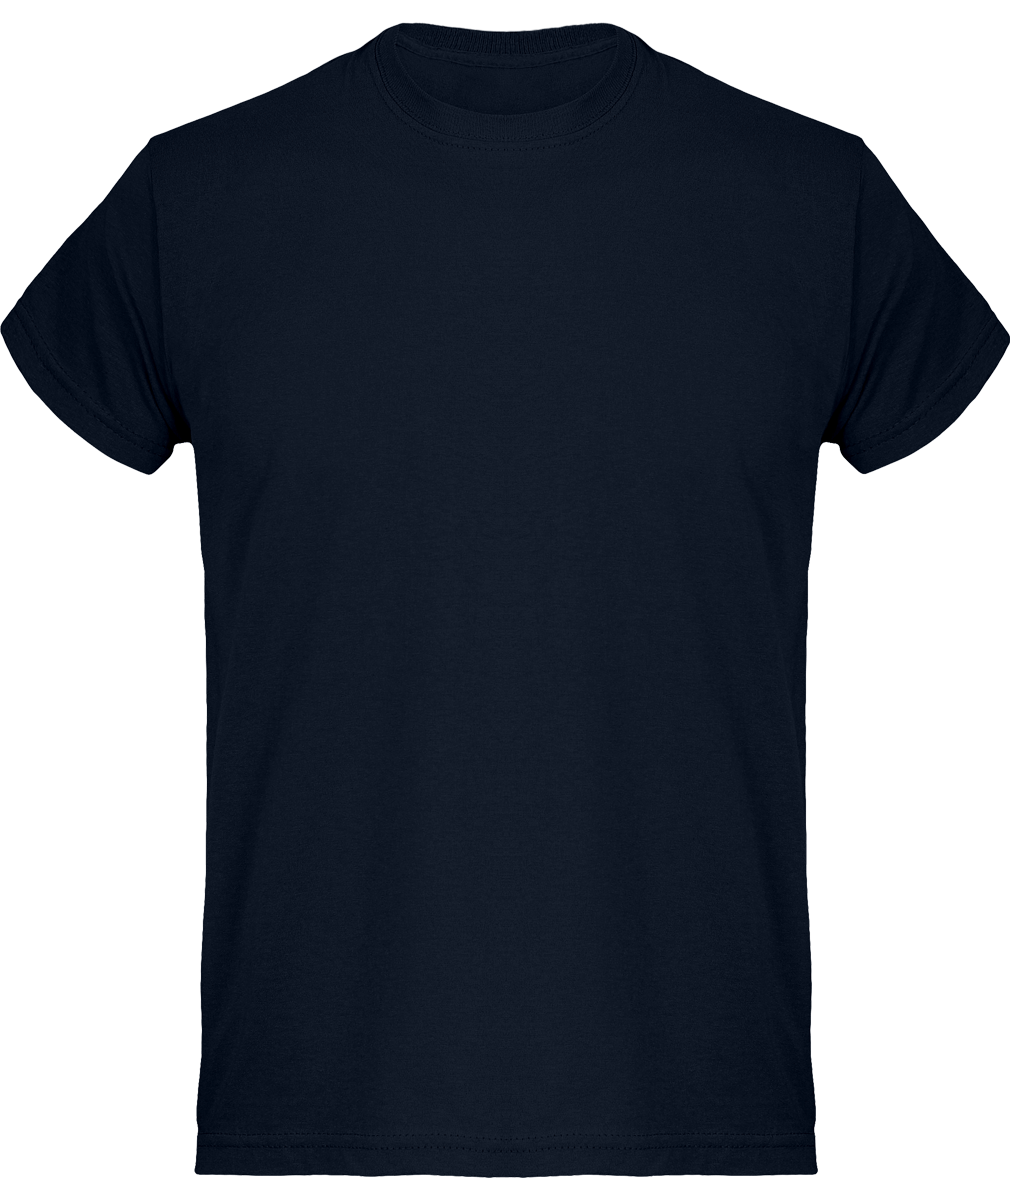 Men's Basic Cotton T-Shirt Ideal For Personalisation Deep Navy